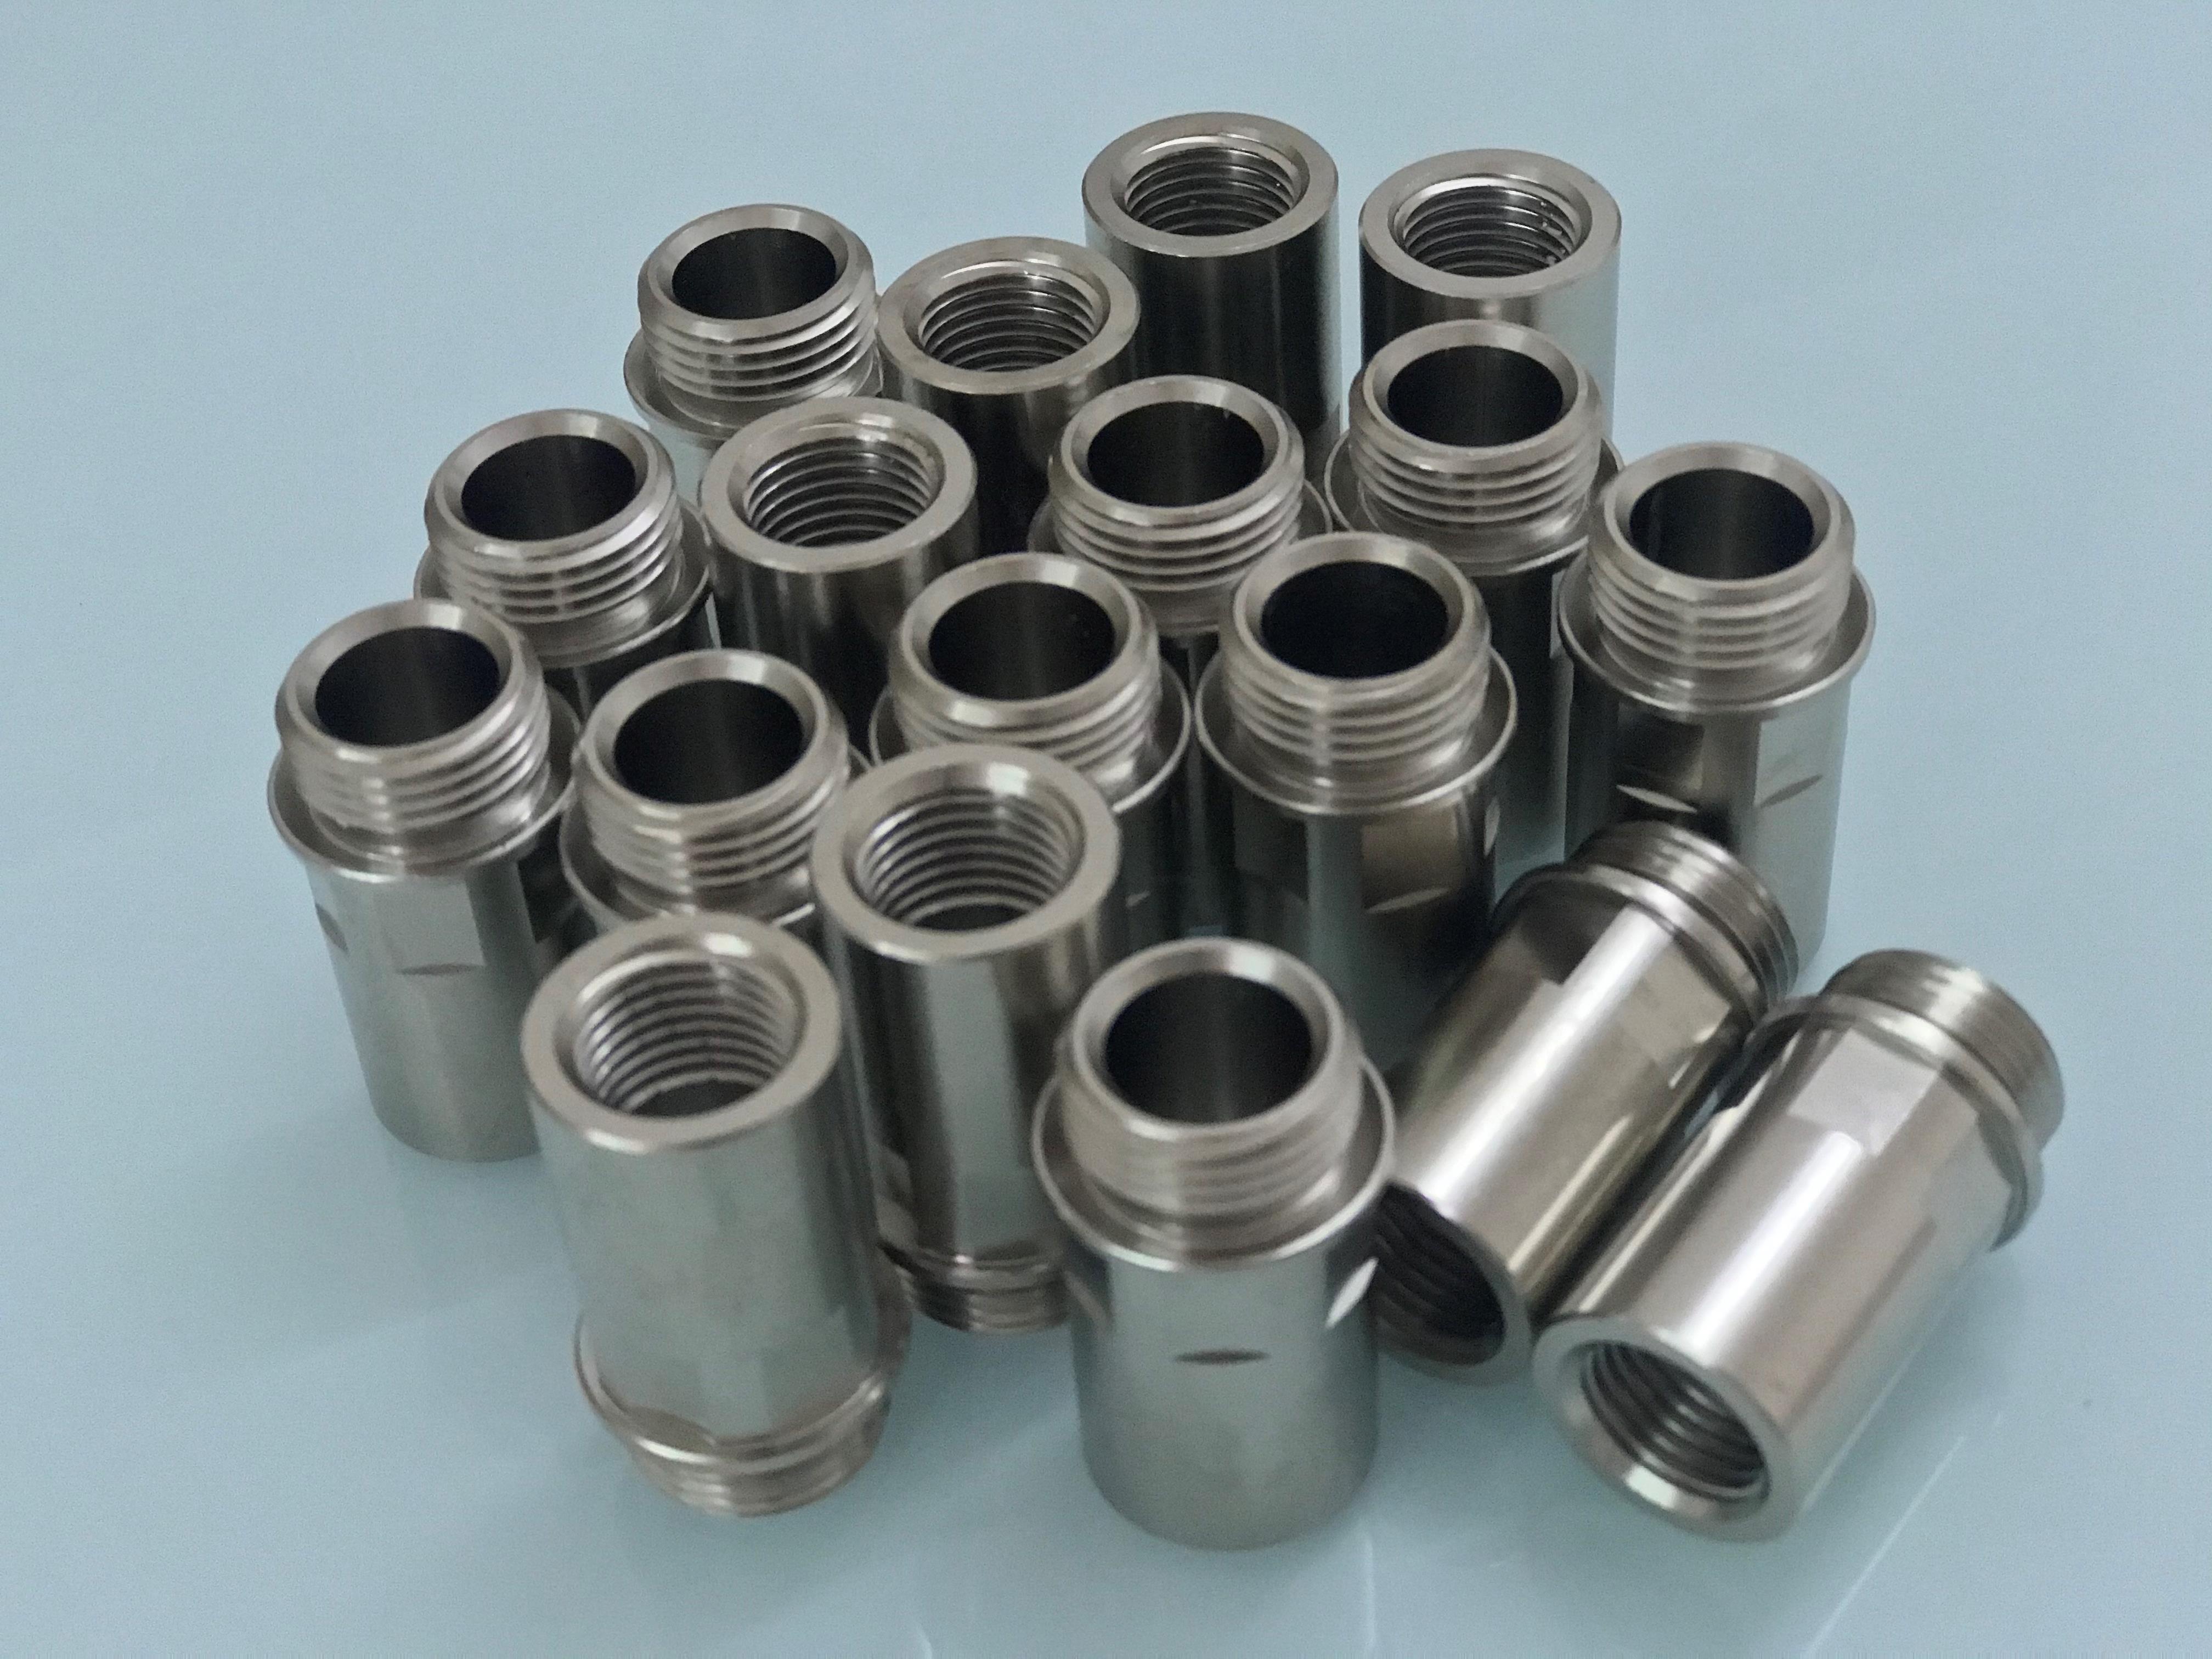 stainless steel coupling adaptor for uvled light source